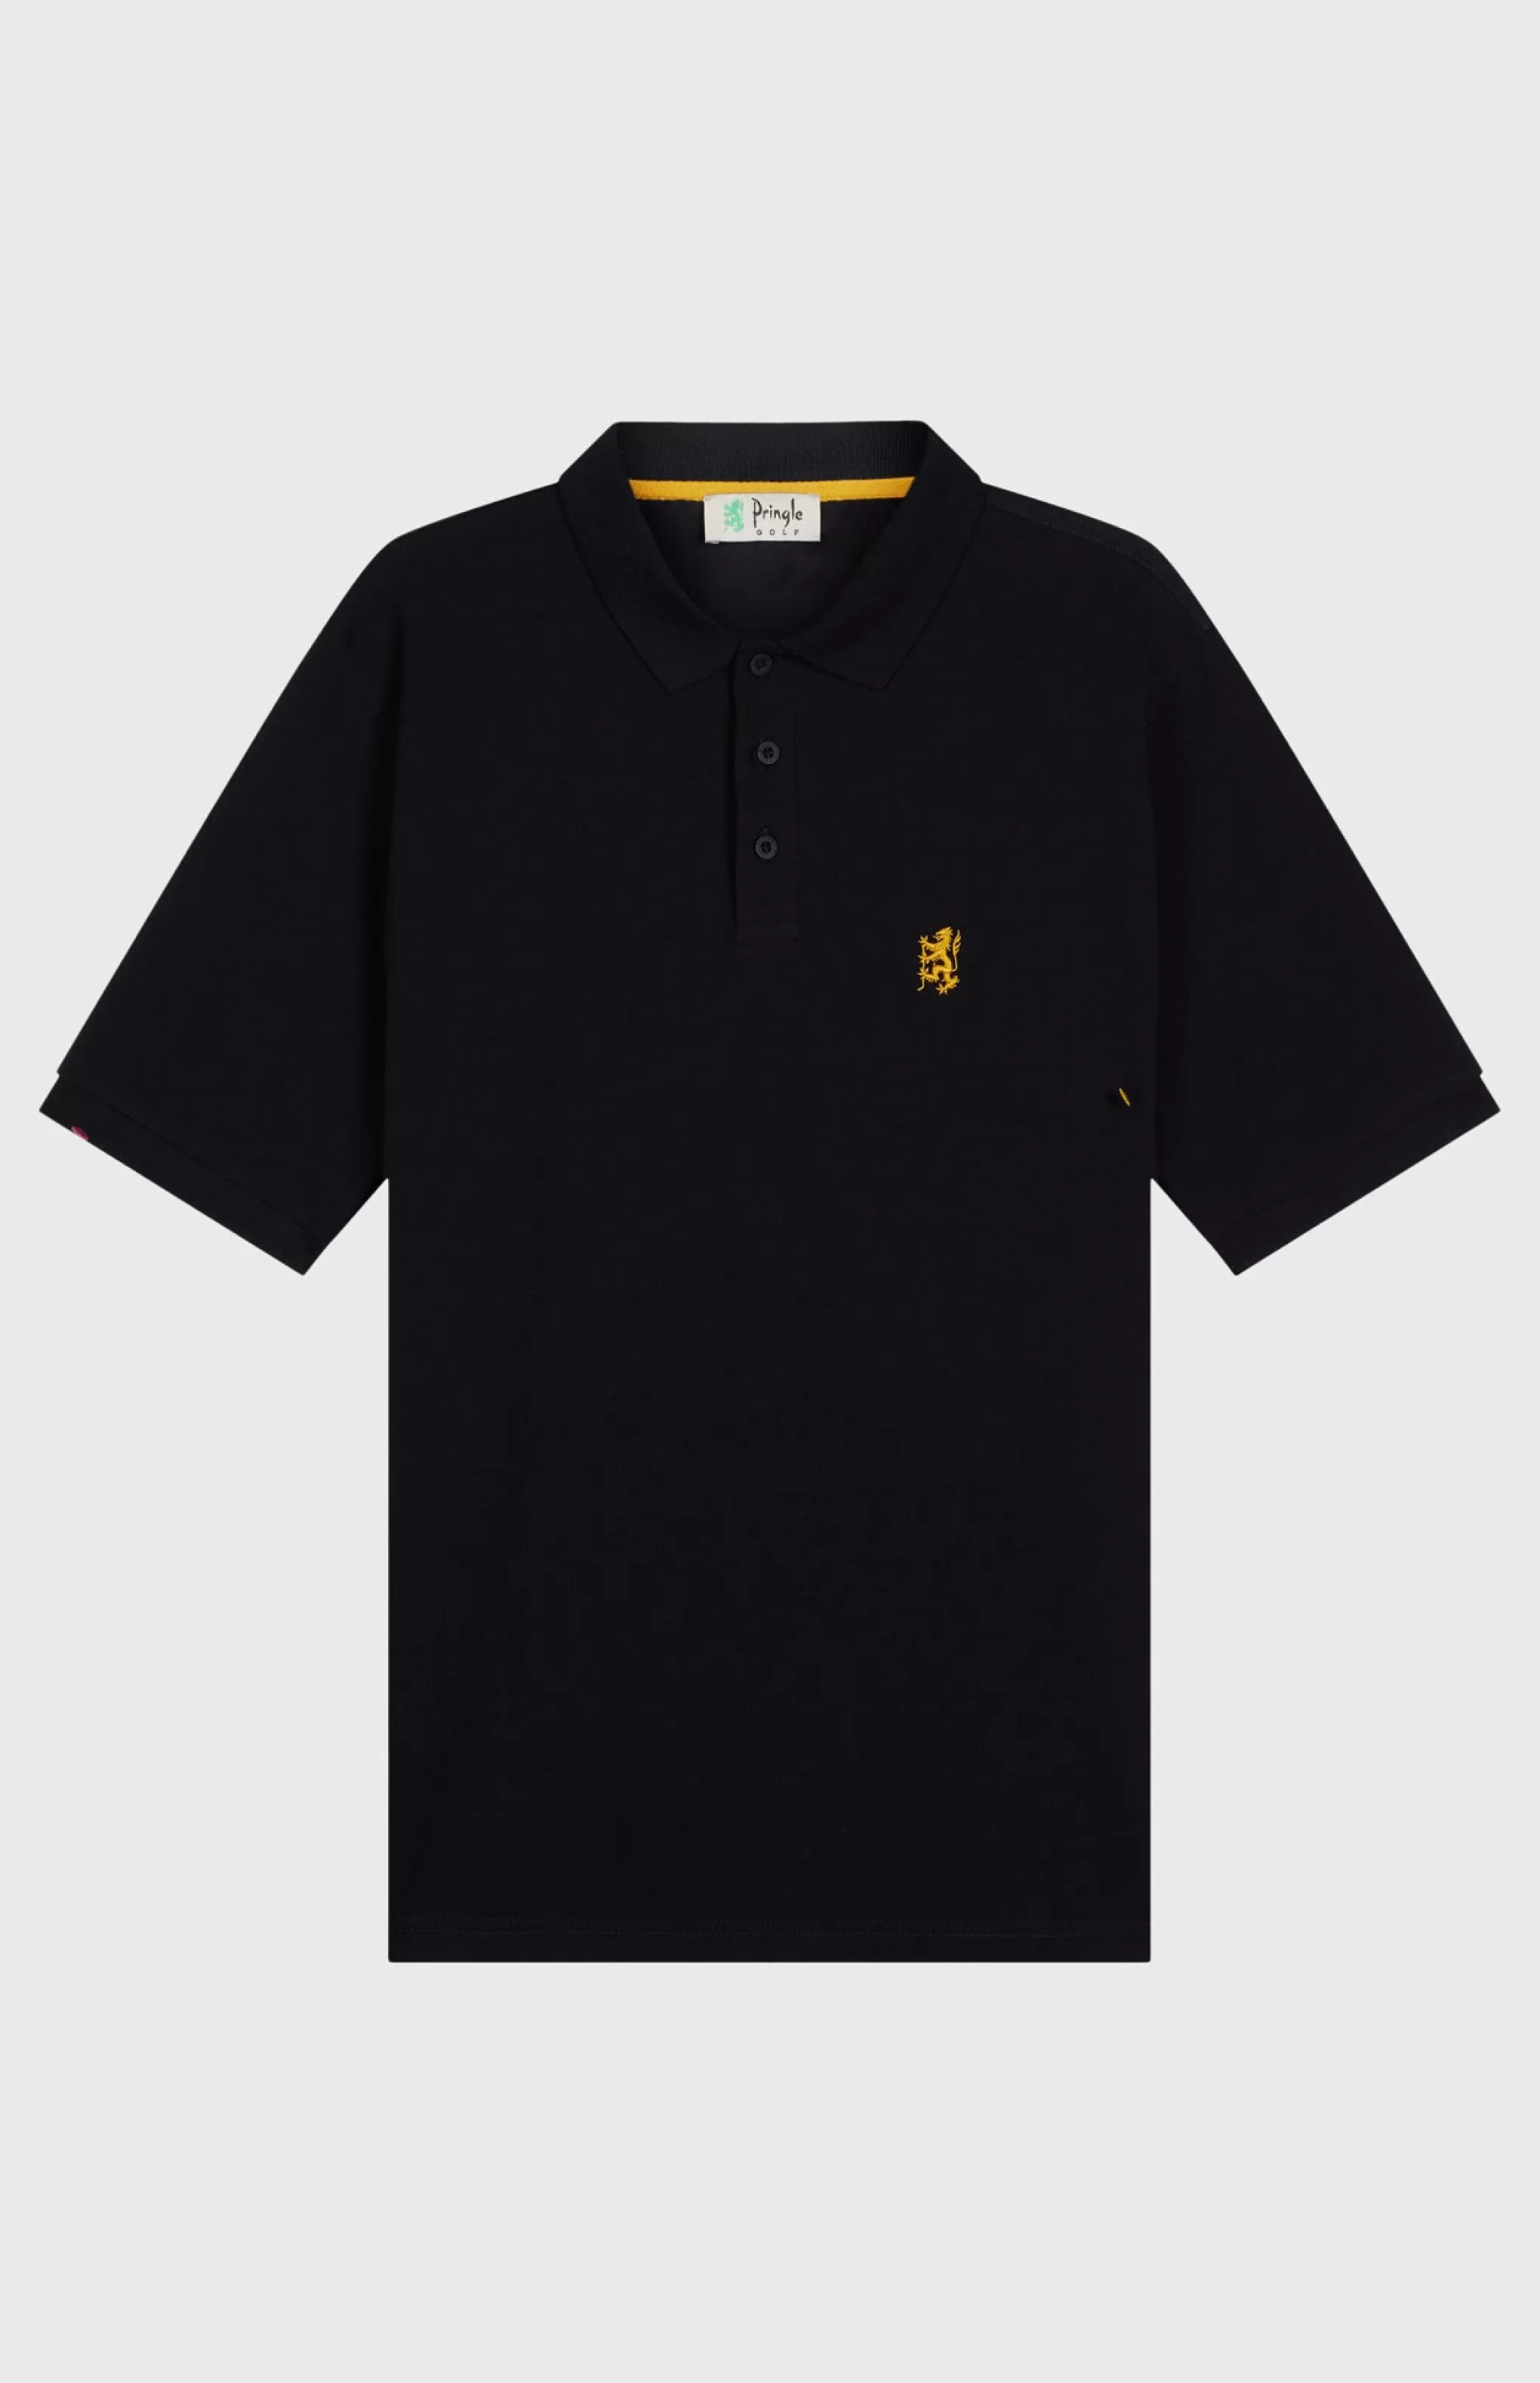 New Cotton Heritage Golf Polo Shirt In Navy Men Polo Shirts